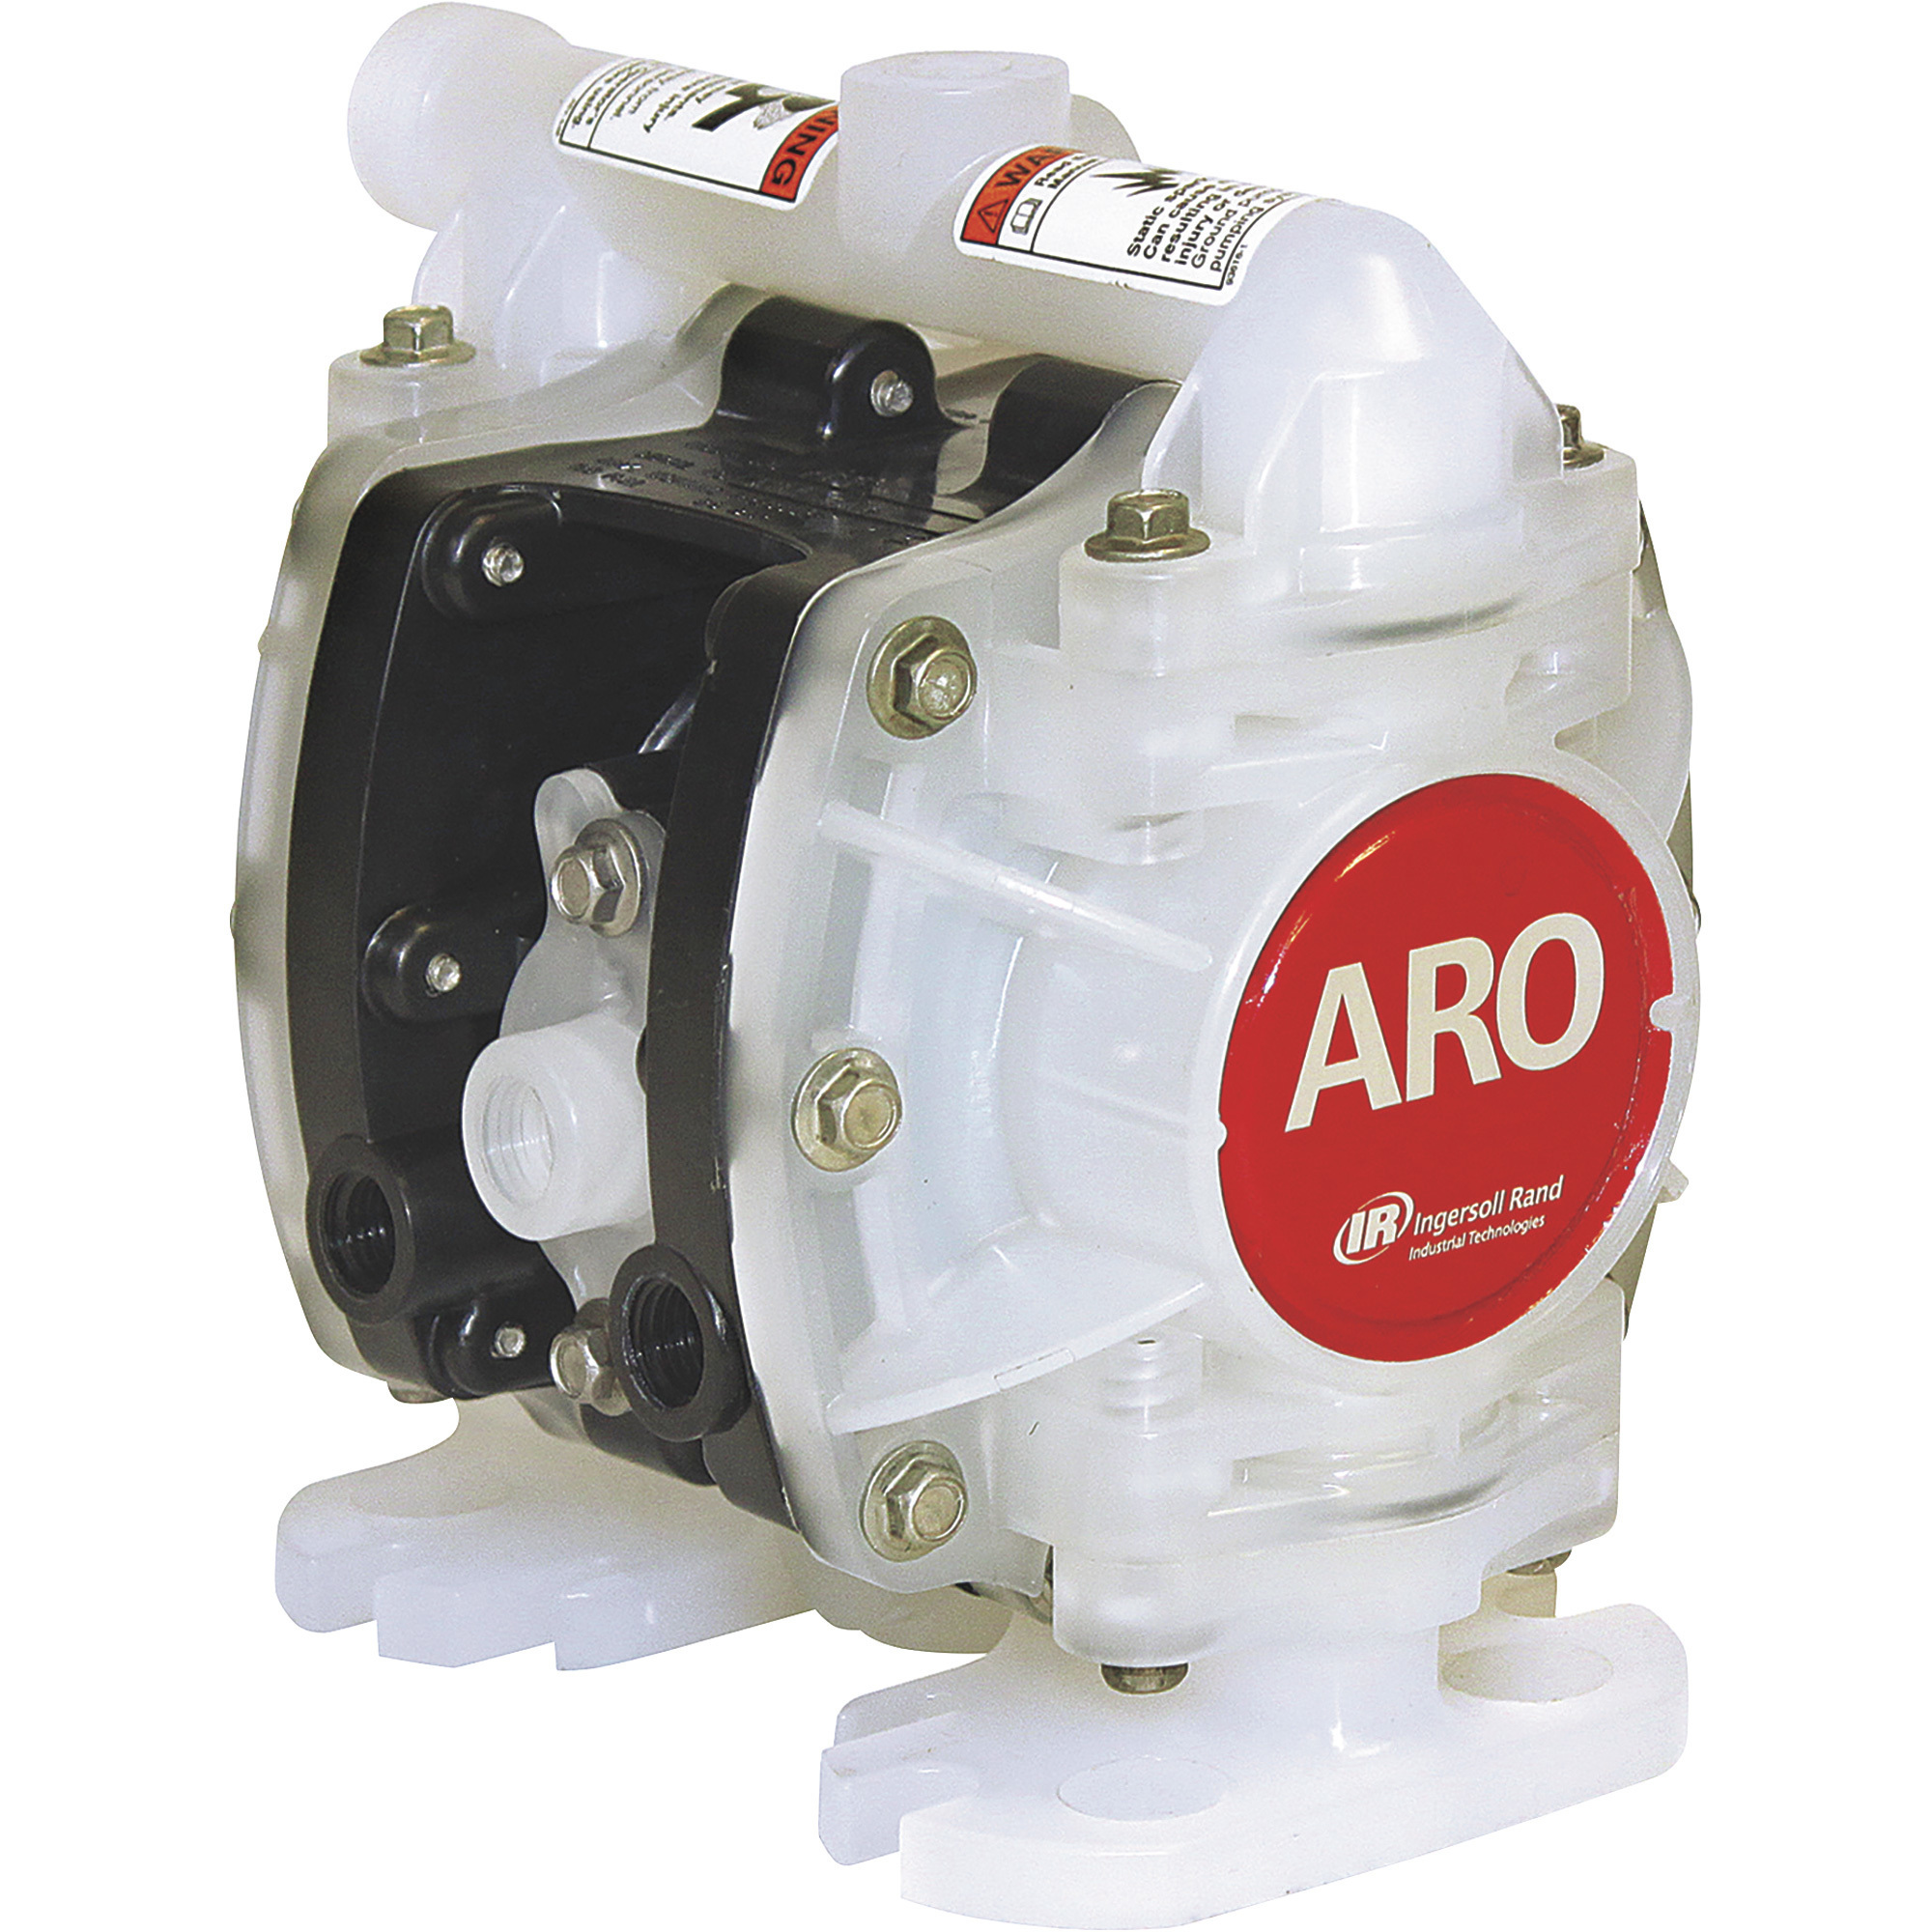 Ingersoll Rand ARO Air-Operated Double Diaphragm Pump, 1/4Inch Ports, 5.3 GPM, Model PD01P-HPS-PTT-A